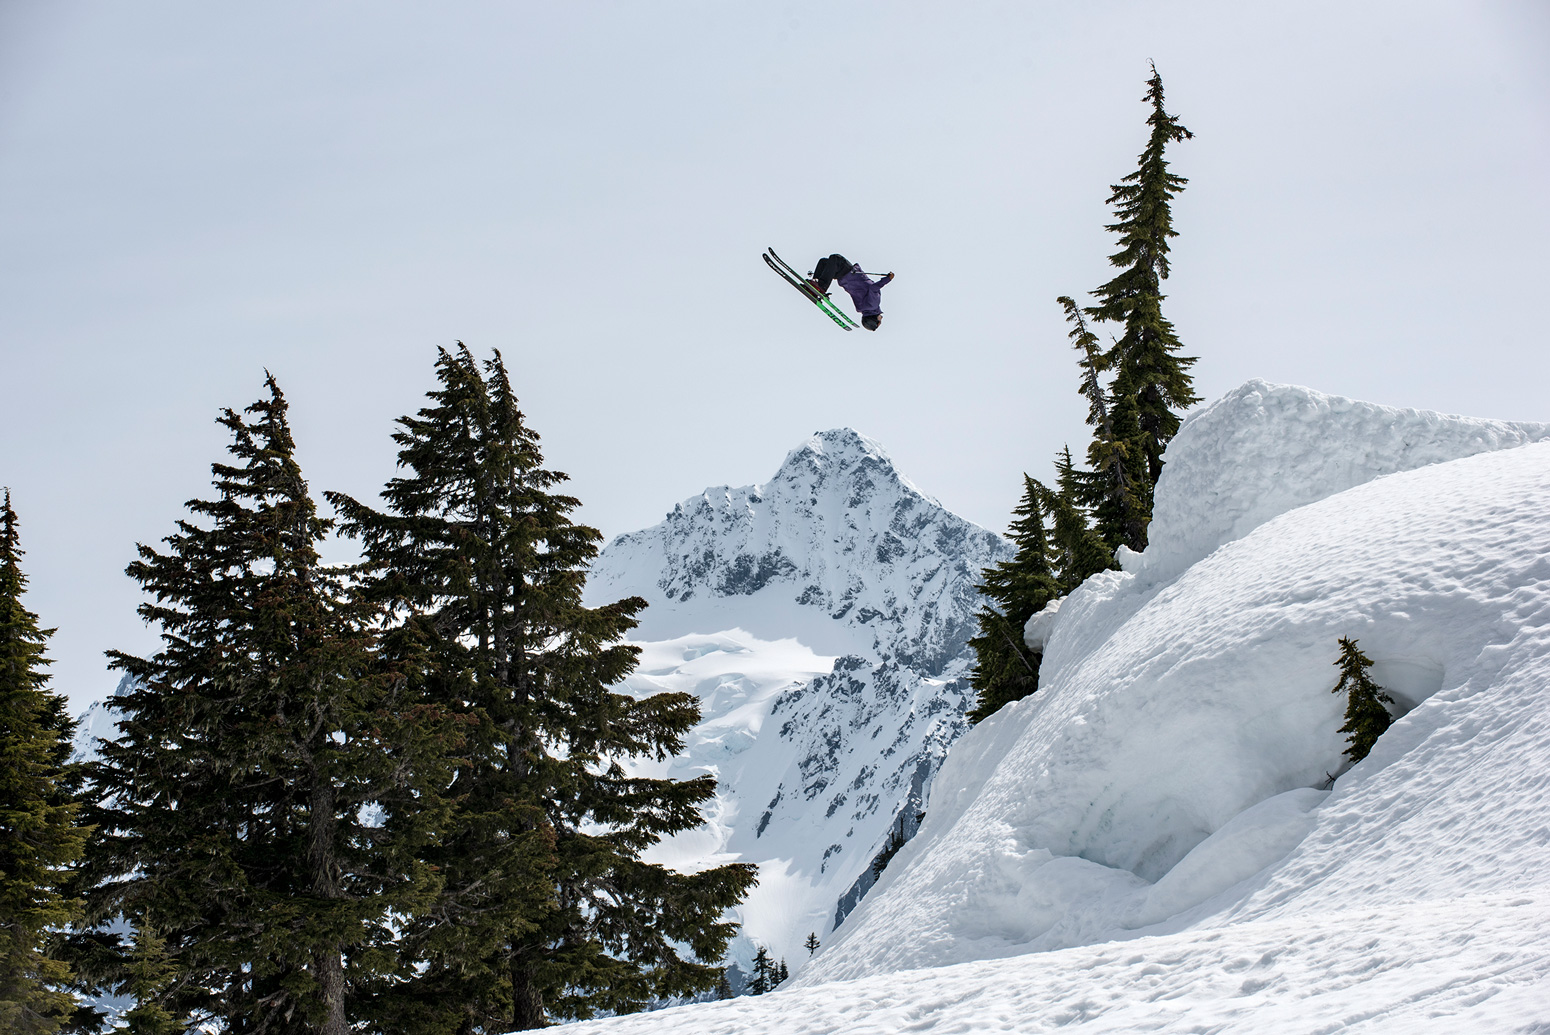 Kuch has made a name for himself going big and sticking style in the backcountry. Here, the young Canadian lays it all out over Home Run Gap at Mt. Baker Ski Area, WA. Photo: Guy Fattal